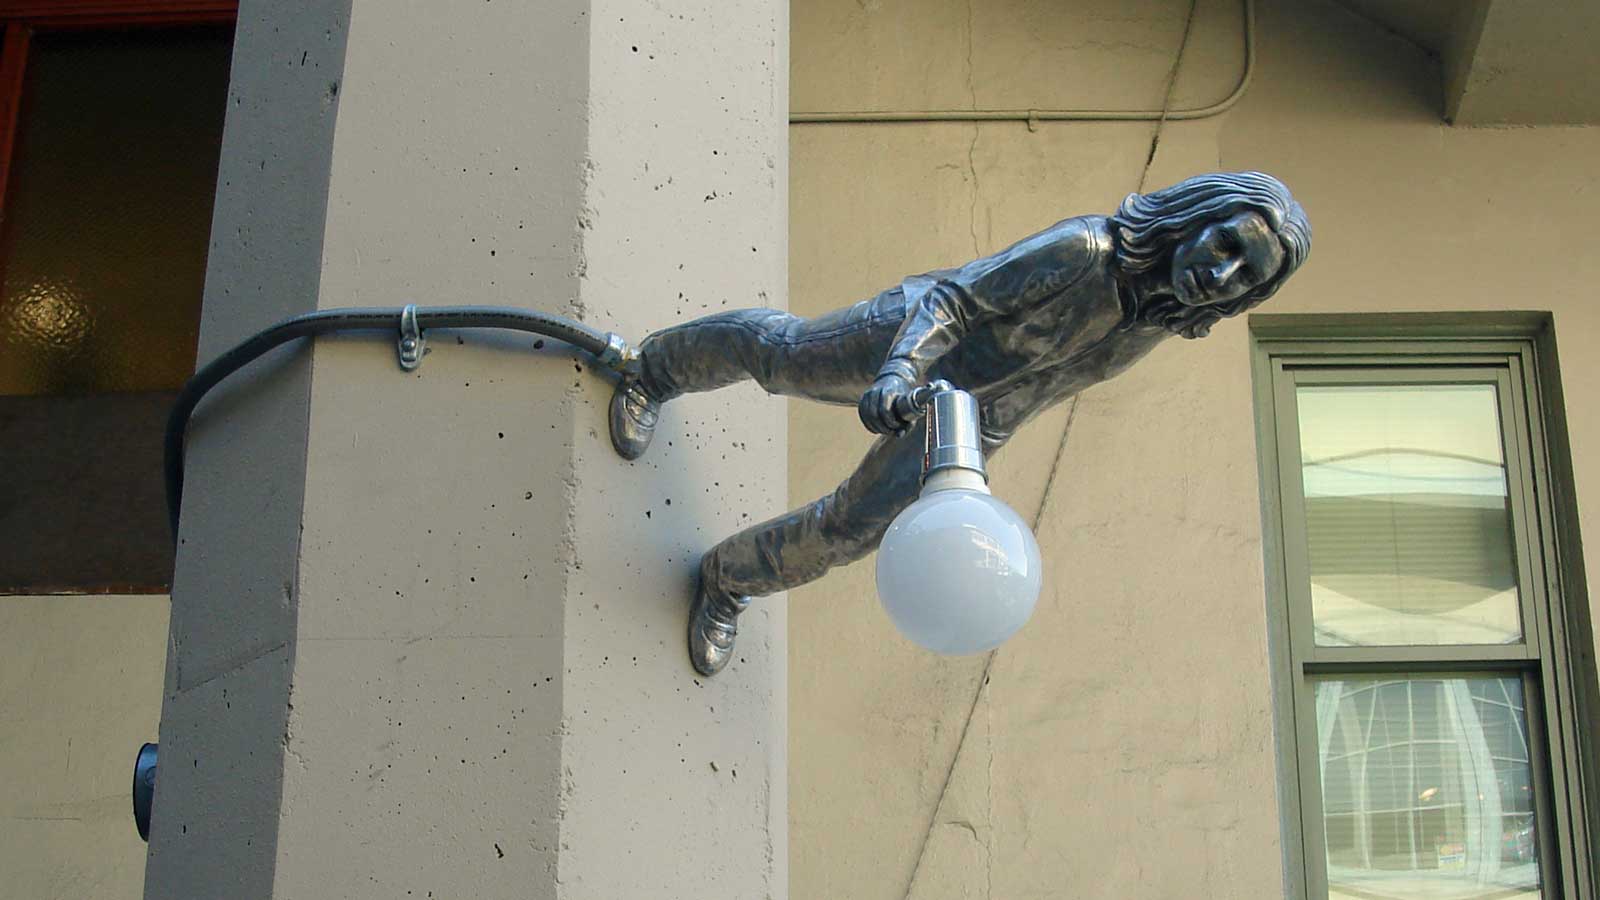 A street lamp shaped like a person standing on a wall